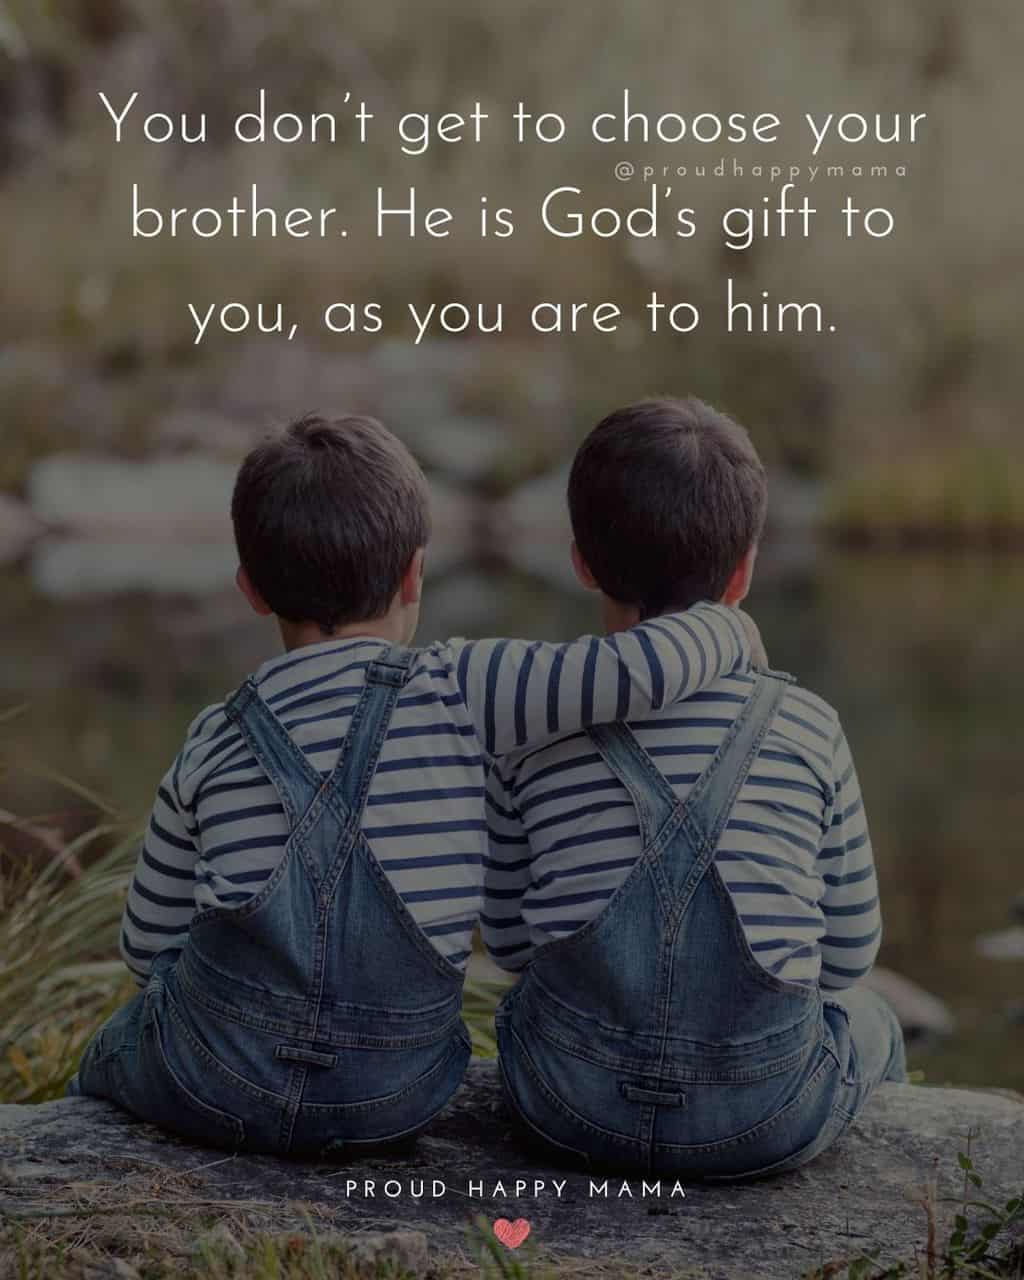 100 Brother Quotes And Sayings About Brotherly Love 